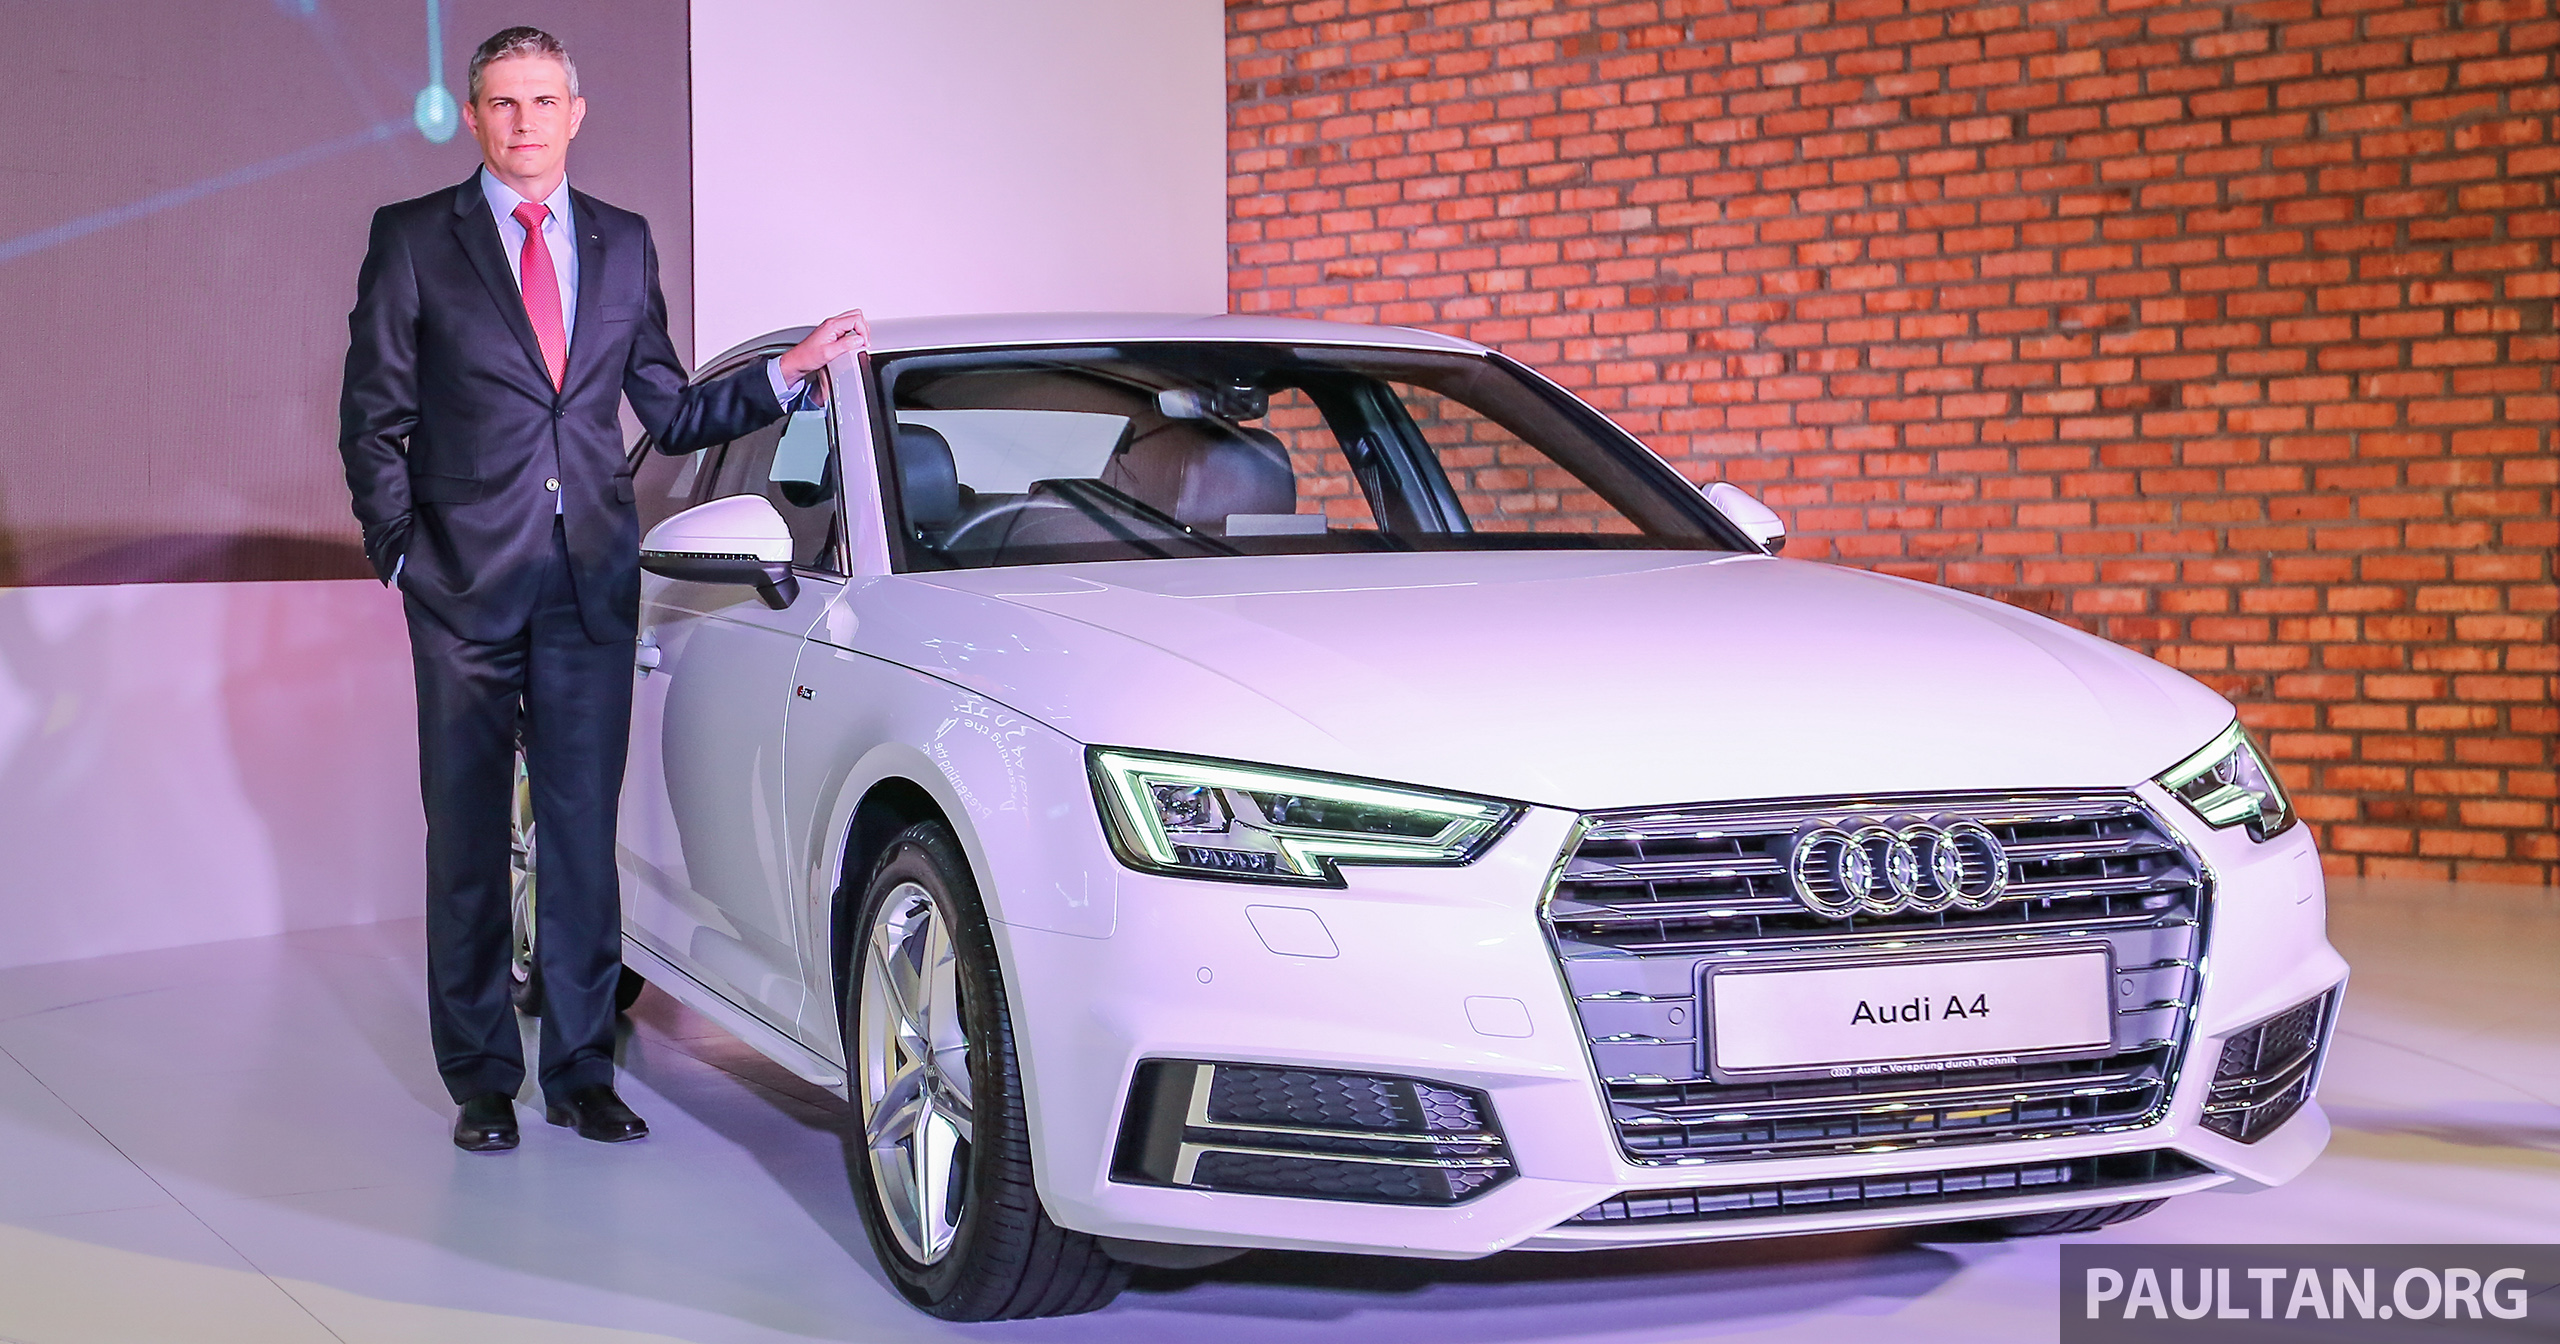 B9 Audi A4 launched in Malaysia - 2.0 TFSI at RM240k 